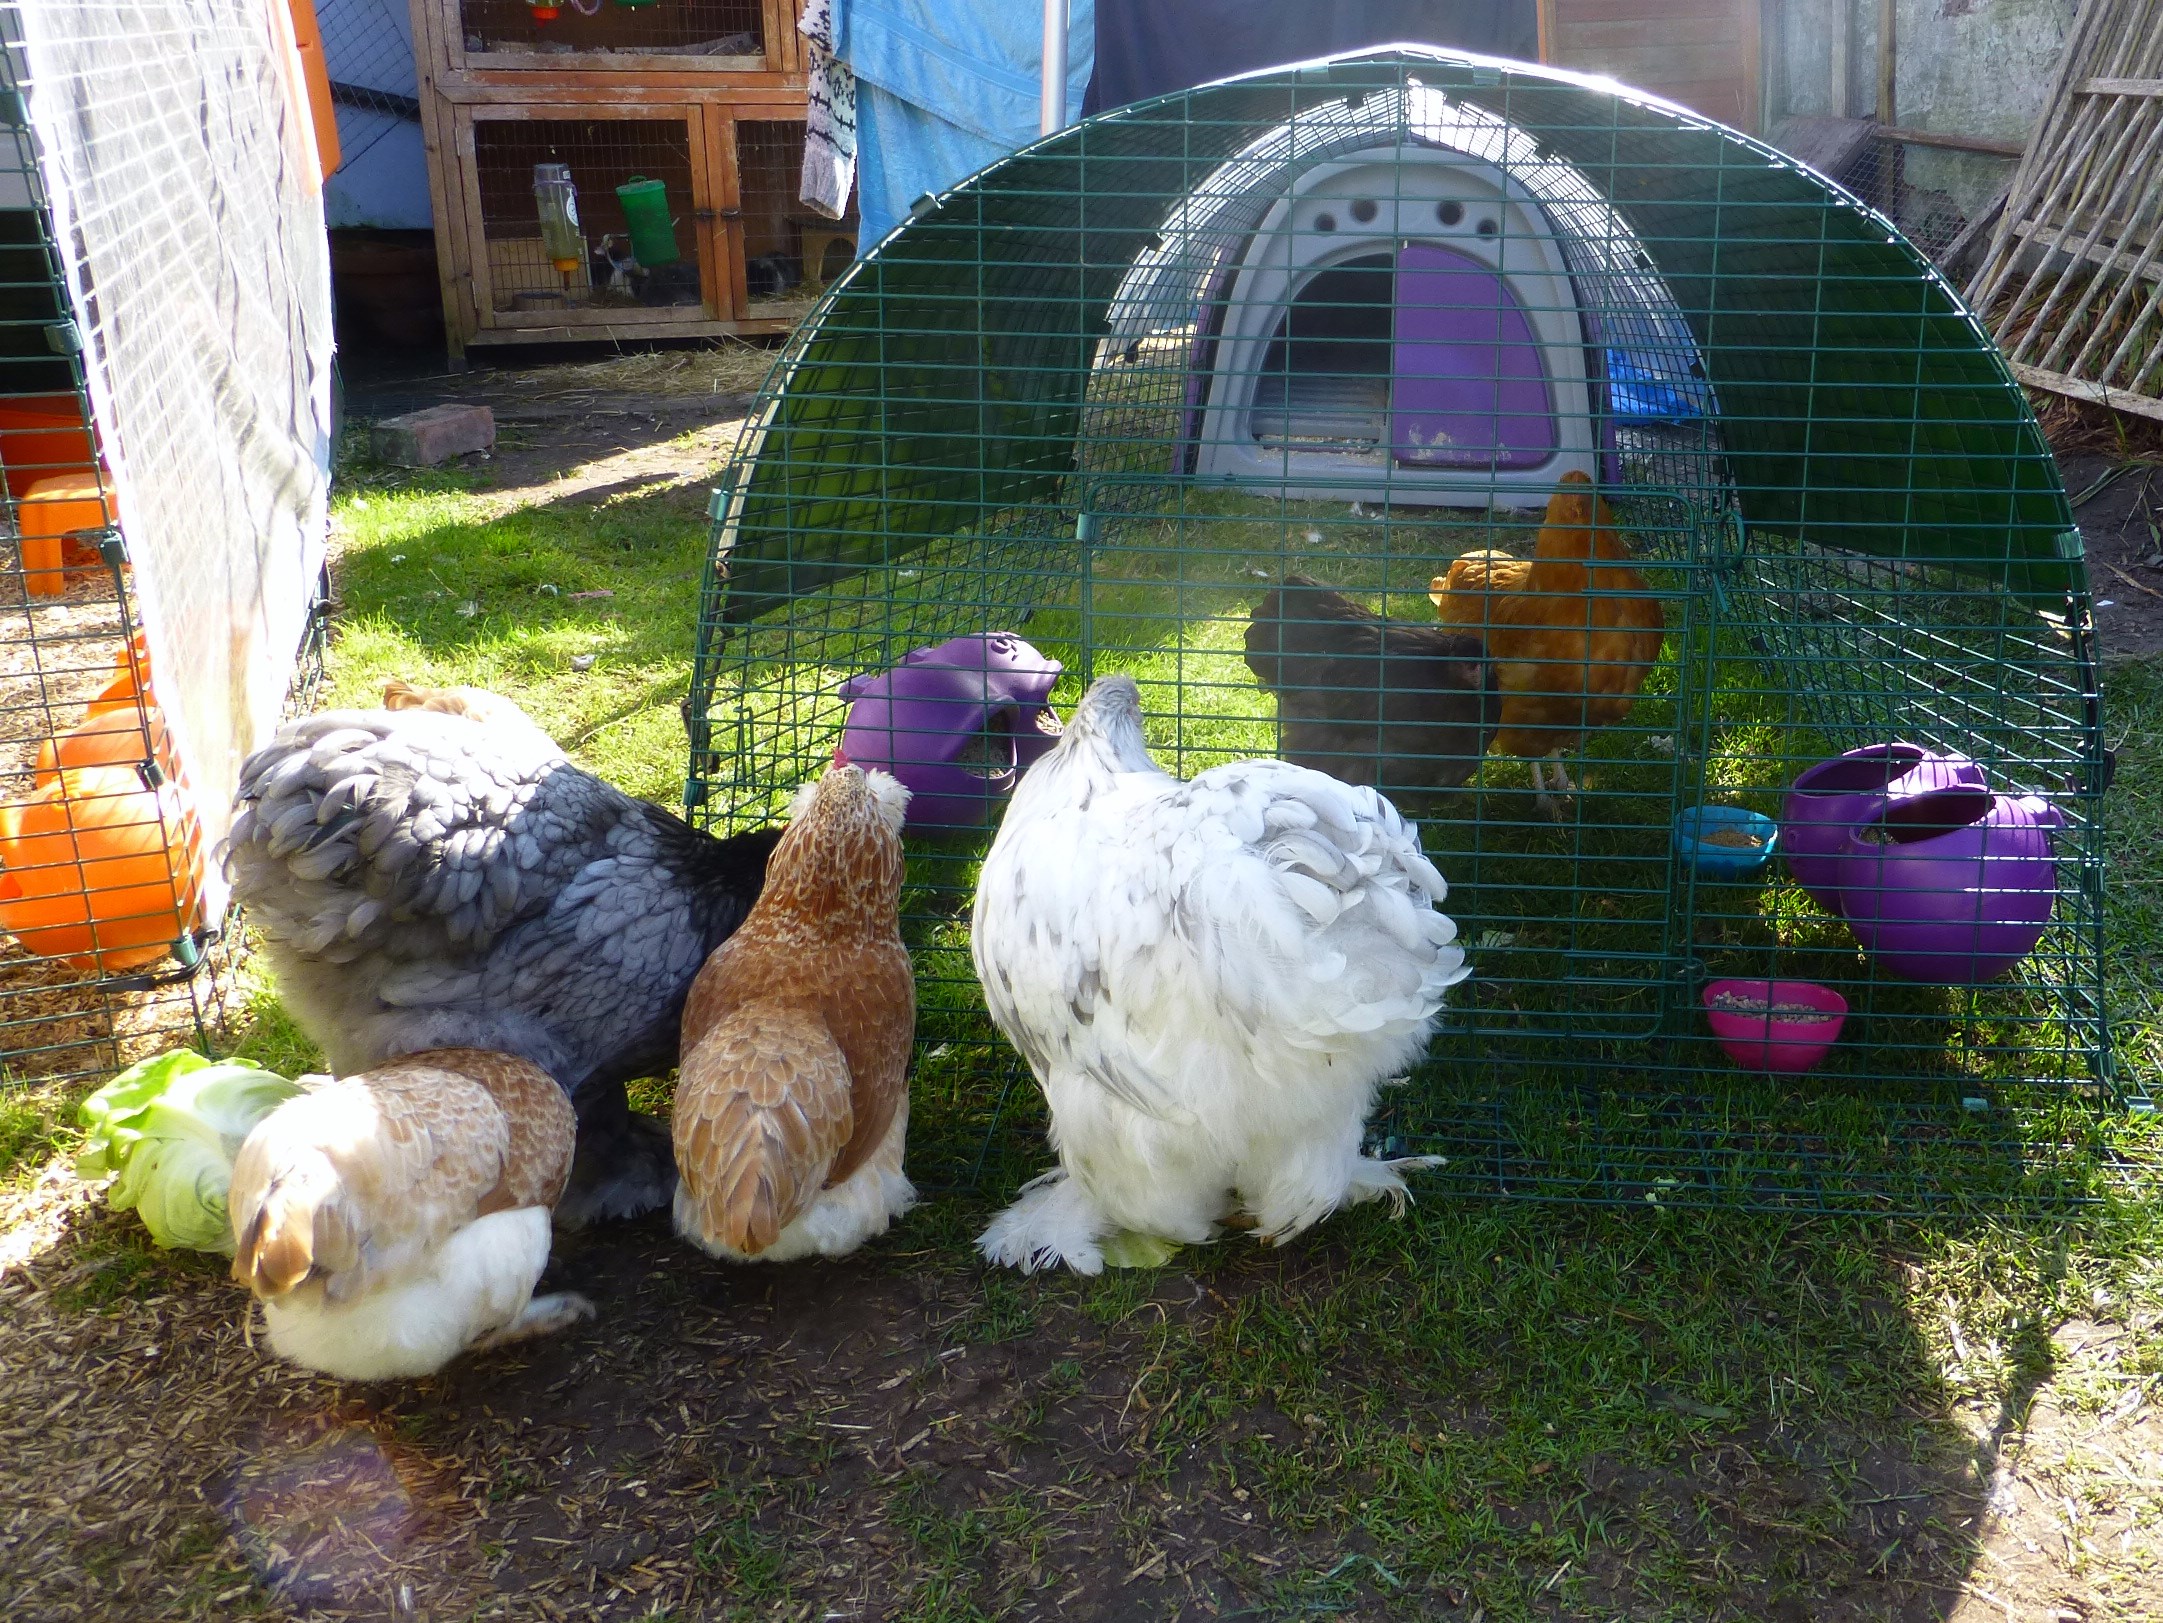 Helen Goodson's hens being introduced to their new Orpington hen friends